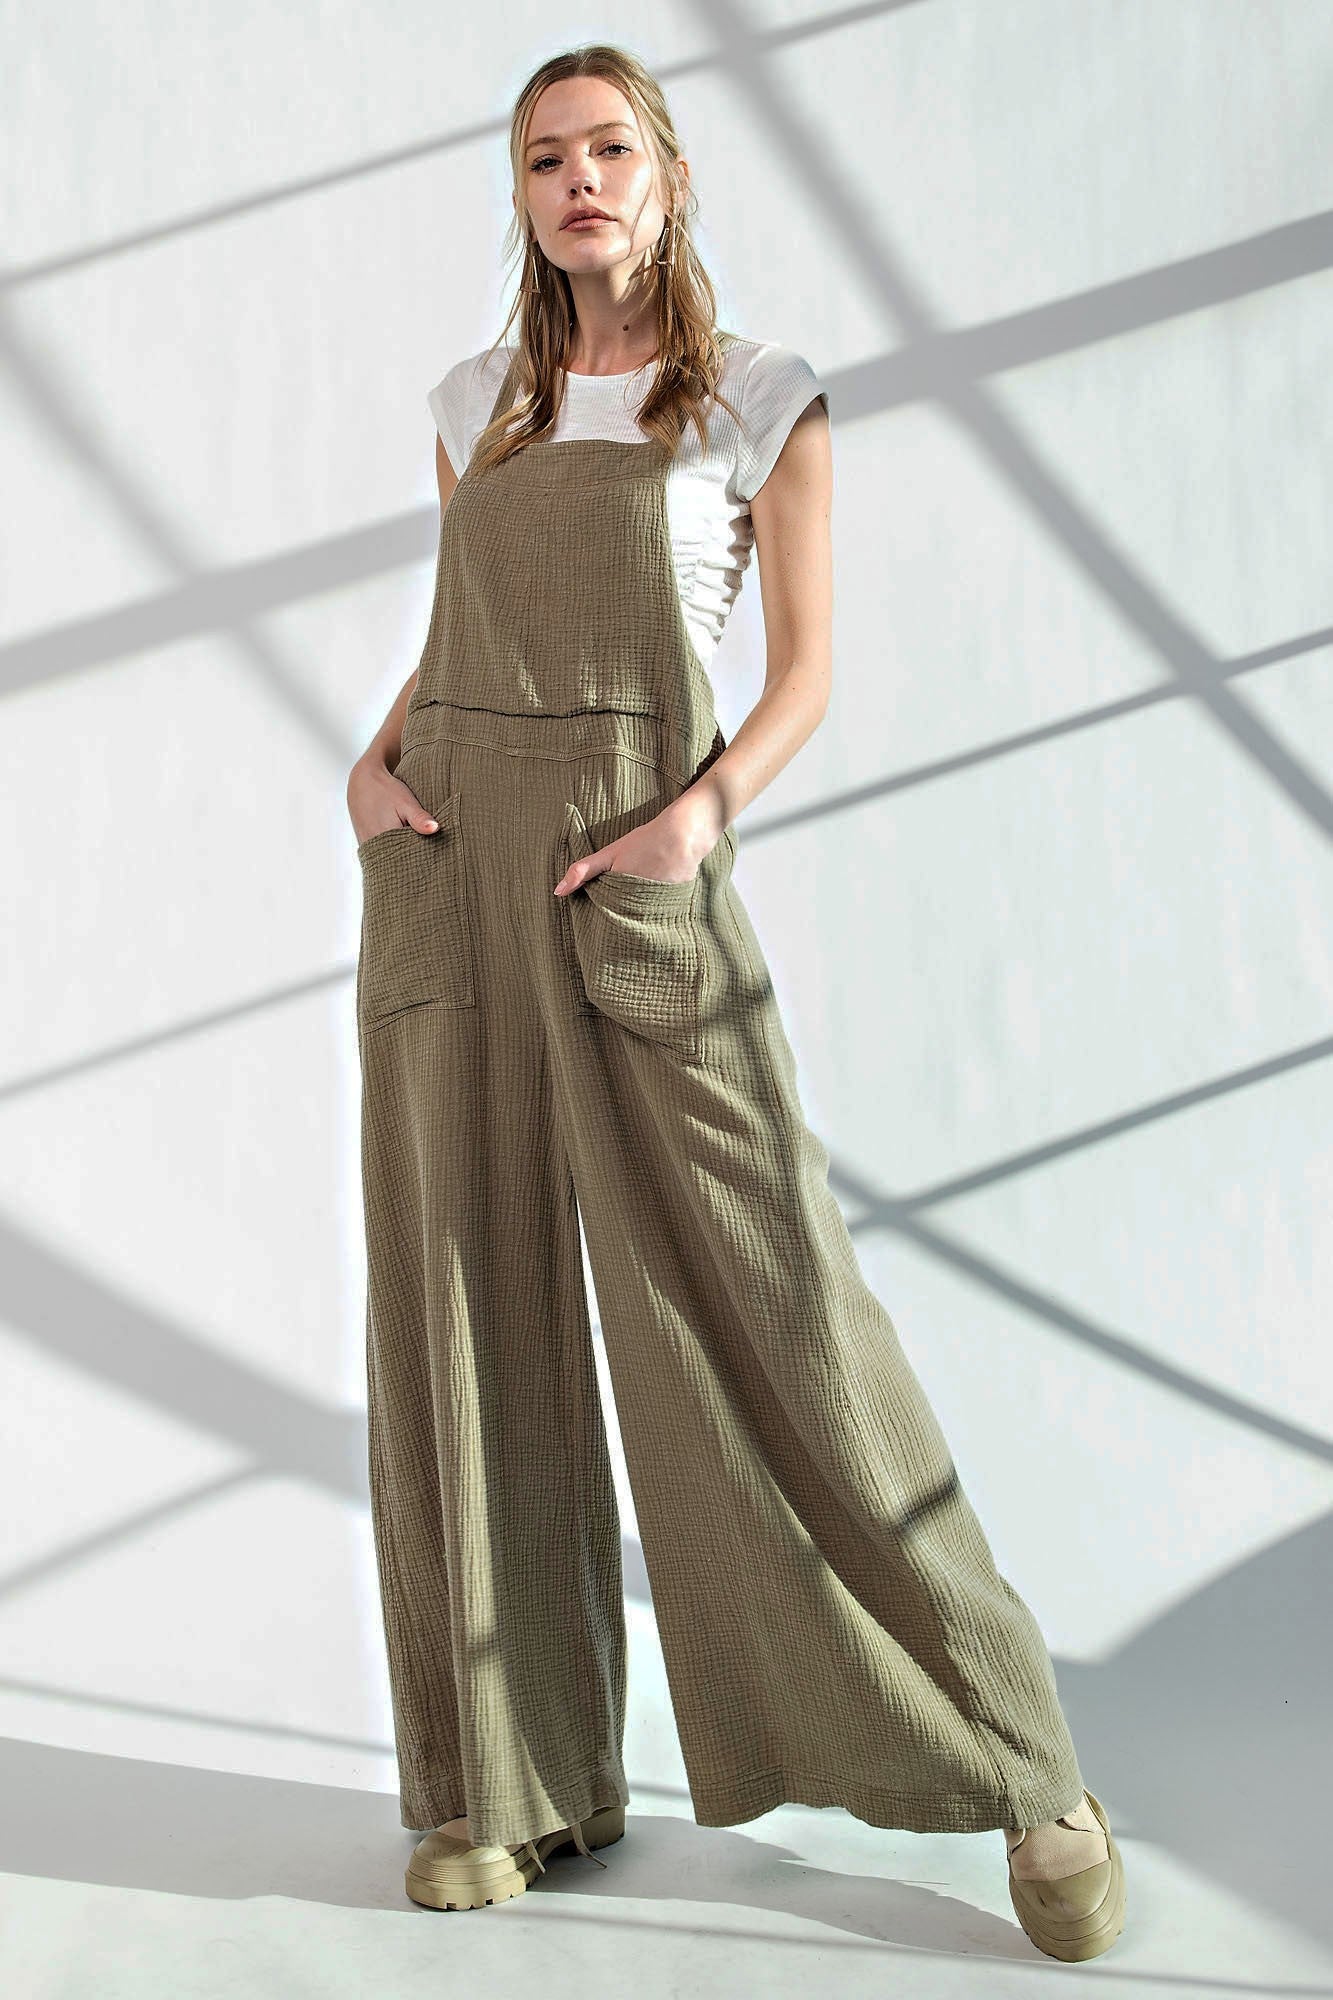 Easel Washed Cotton Jumpsuit/Overalls in Faded Olive – June Adel